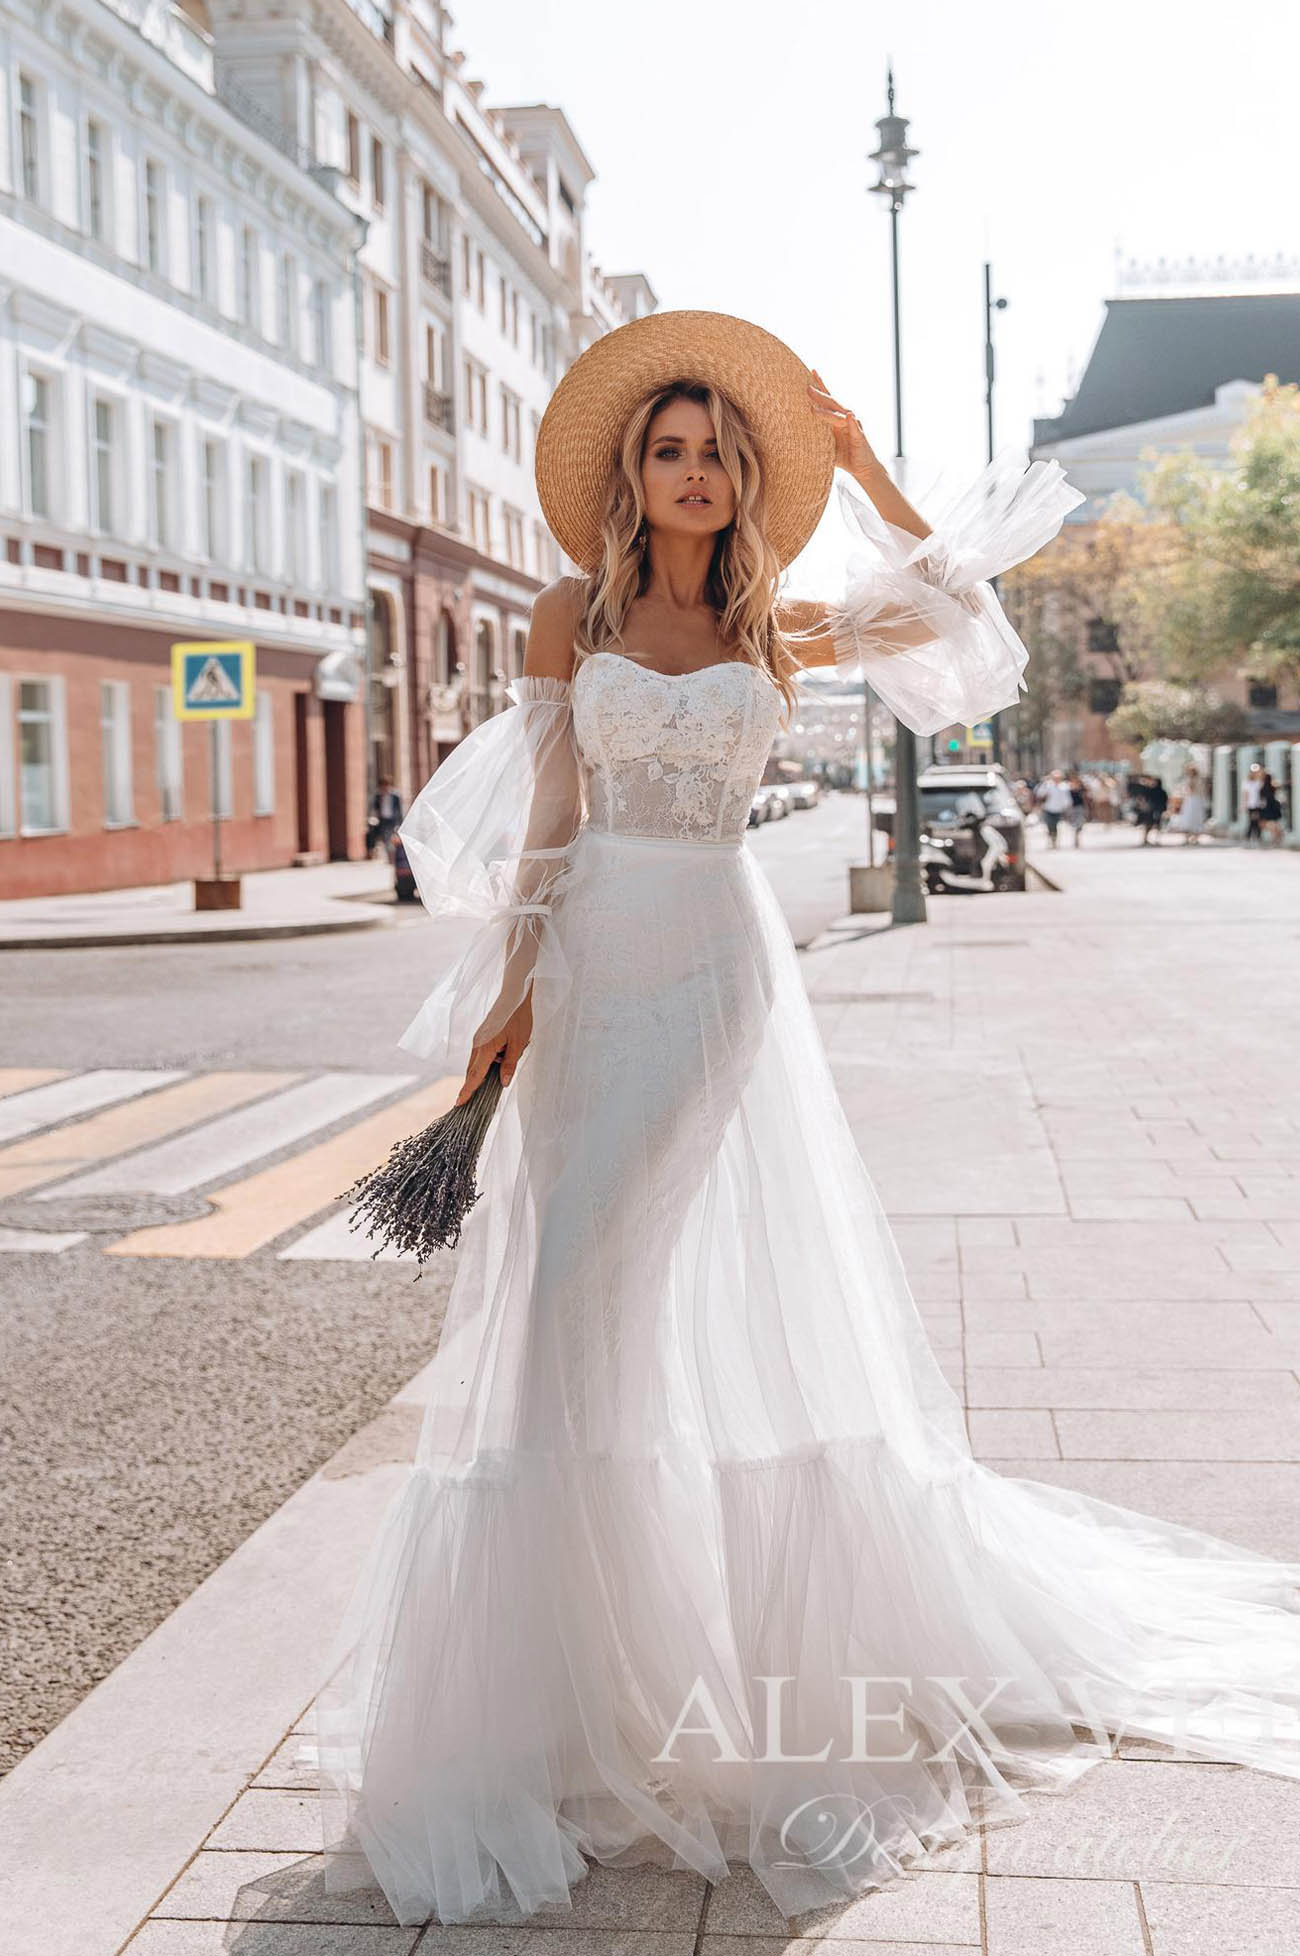 Wedding Dresses for Hourglass Shaped Brides | SouthBound Bride